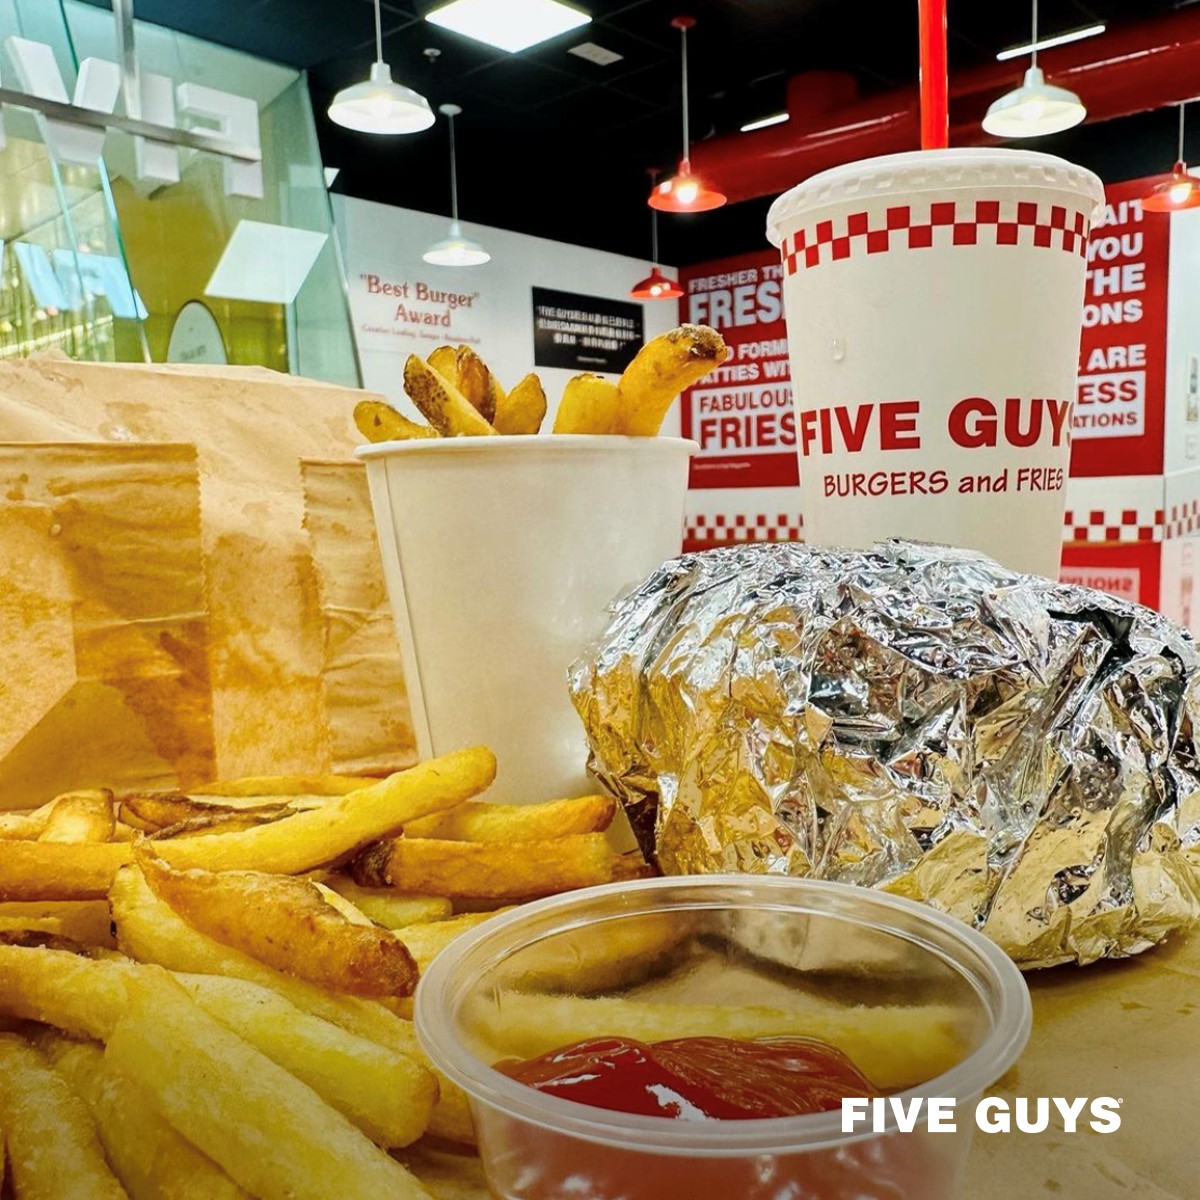 burger, fries and soda - tasty itens of the five Guys menu